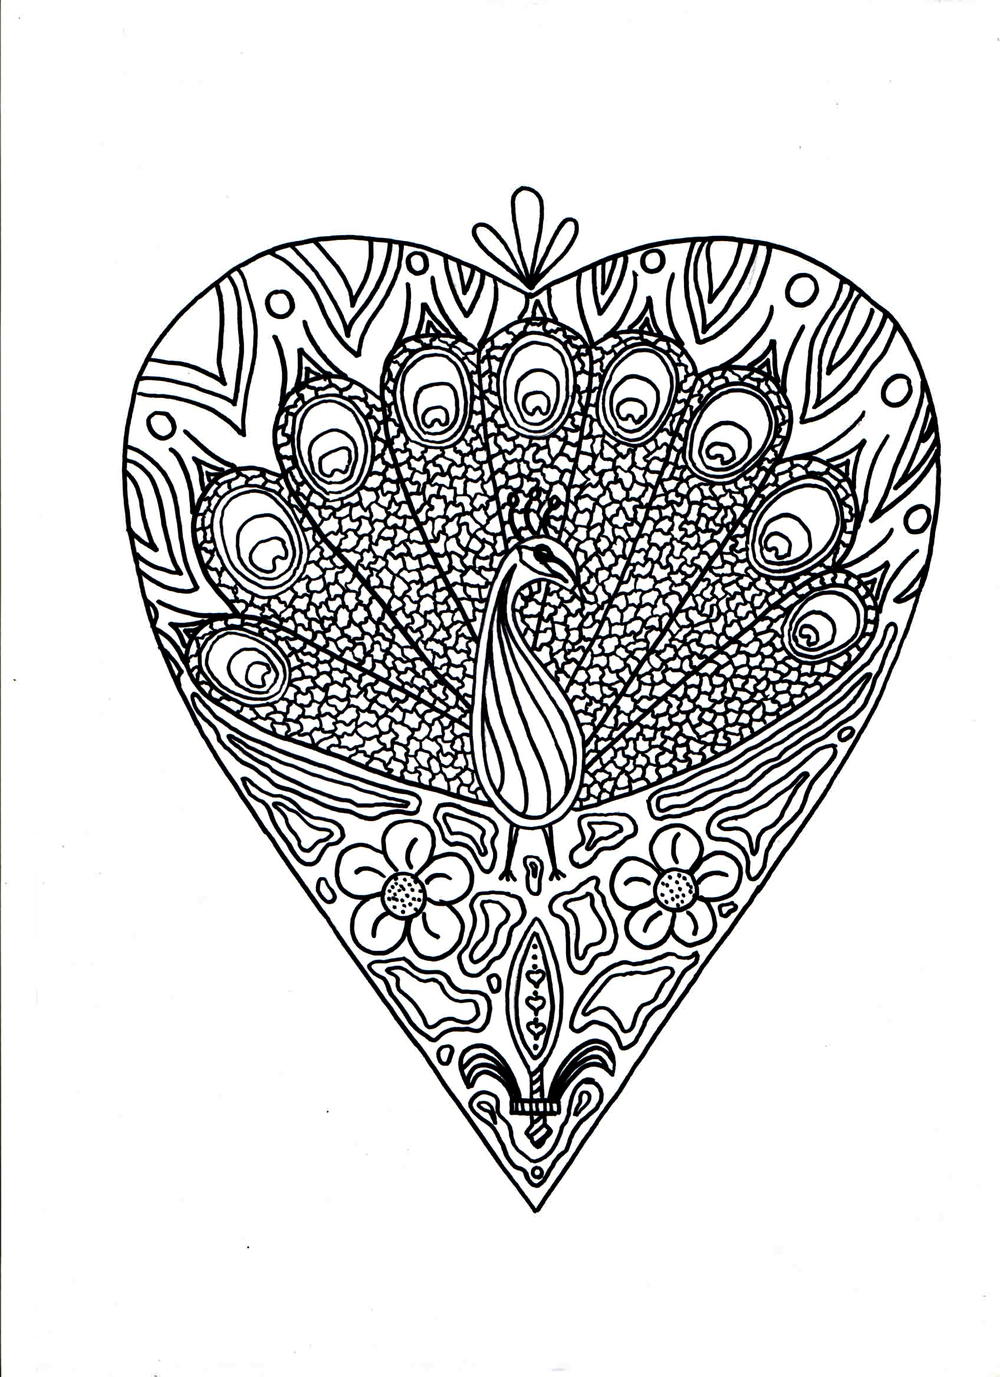 Peacock Printable Coloring Page FaveCraftscom